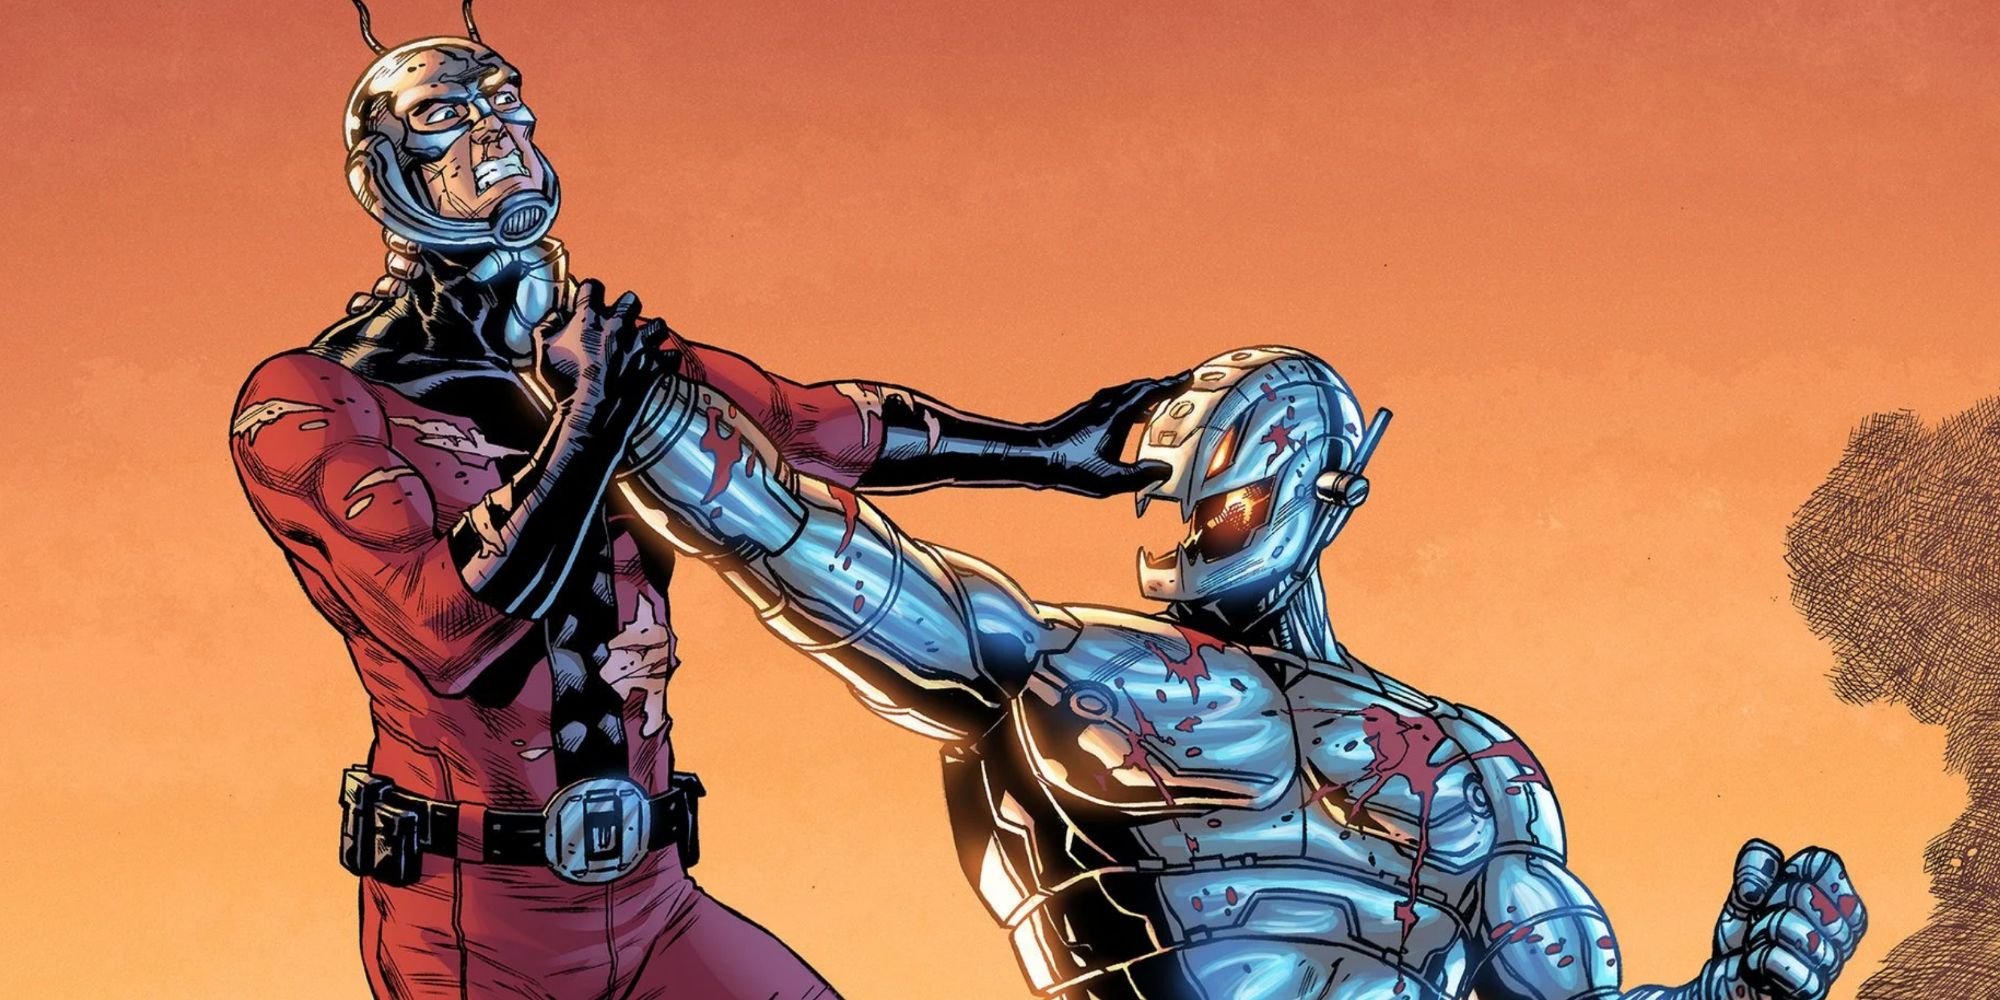 Ant-Man and Ultron struggle in Marvel comics